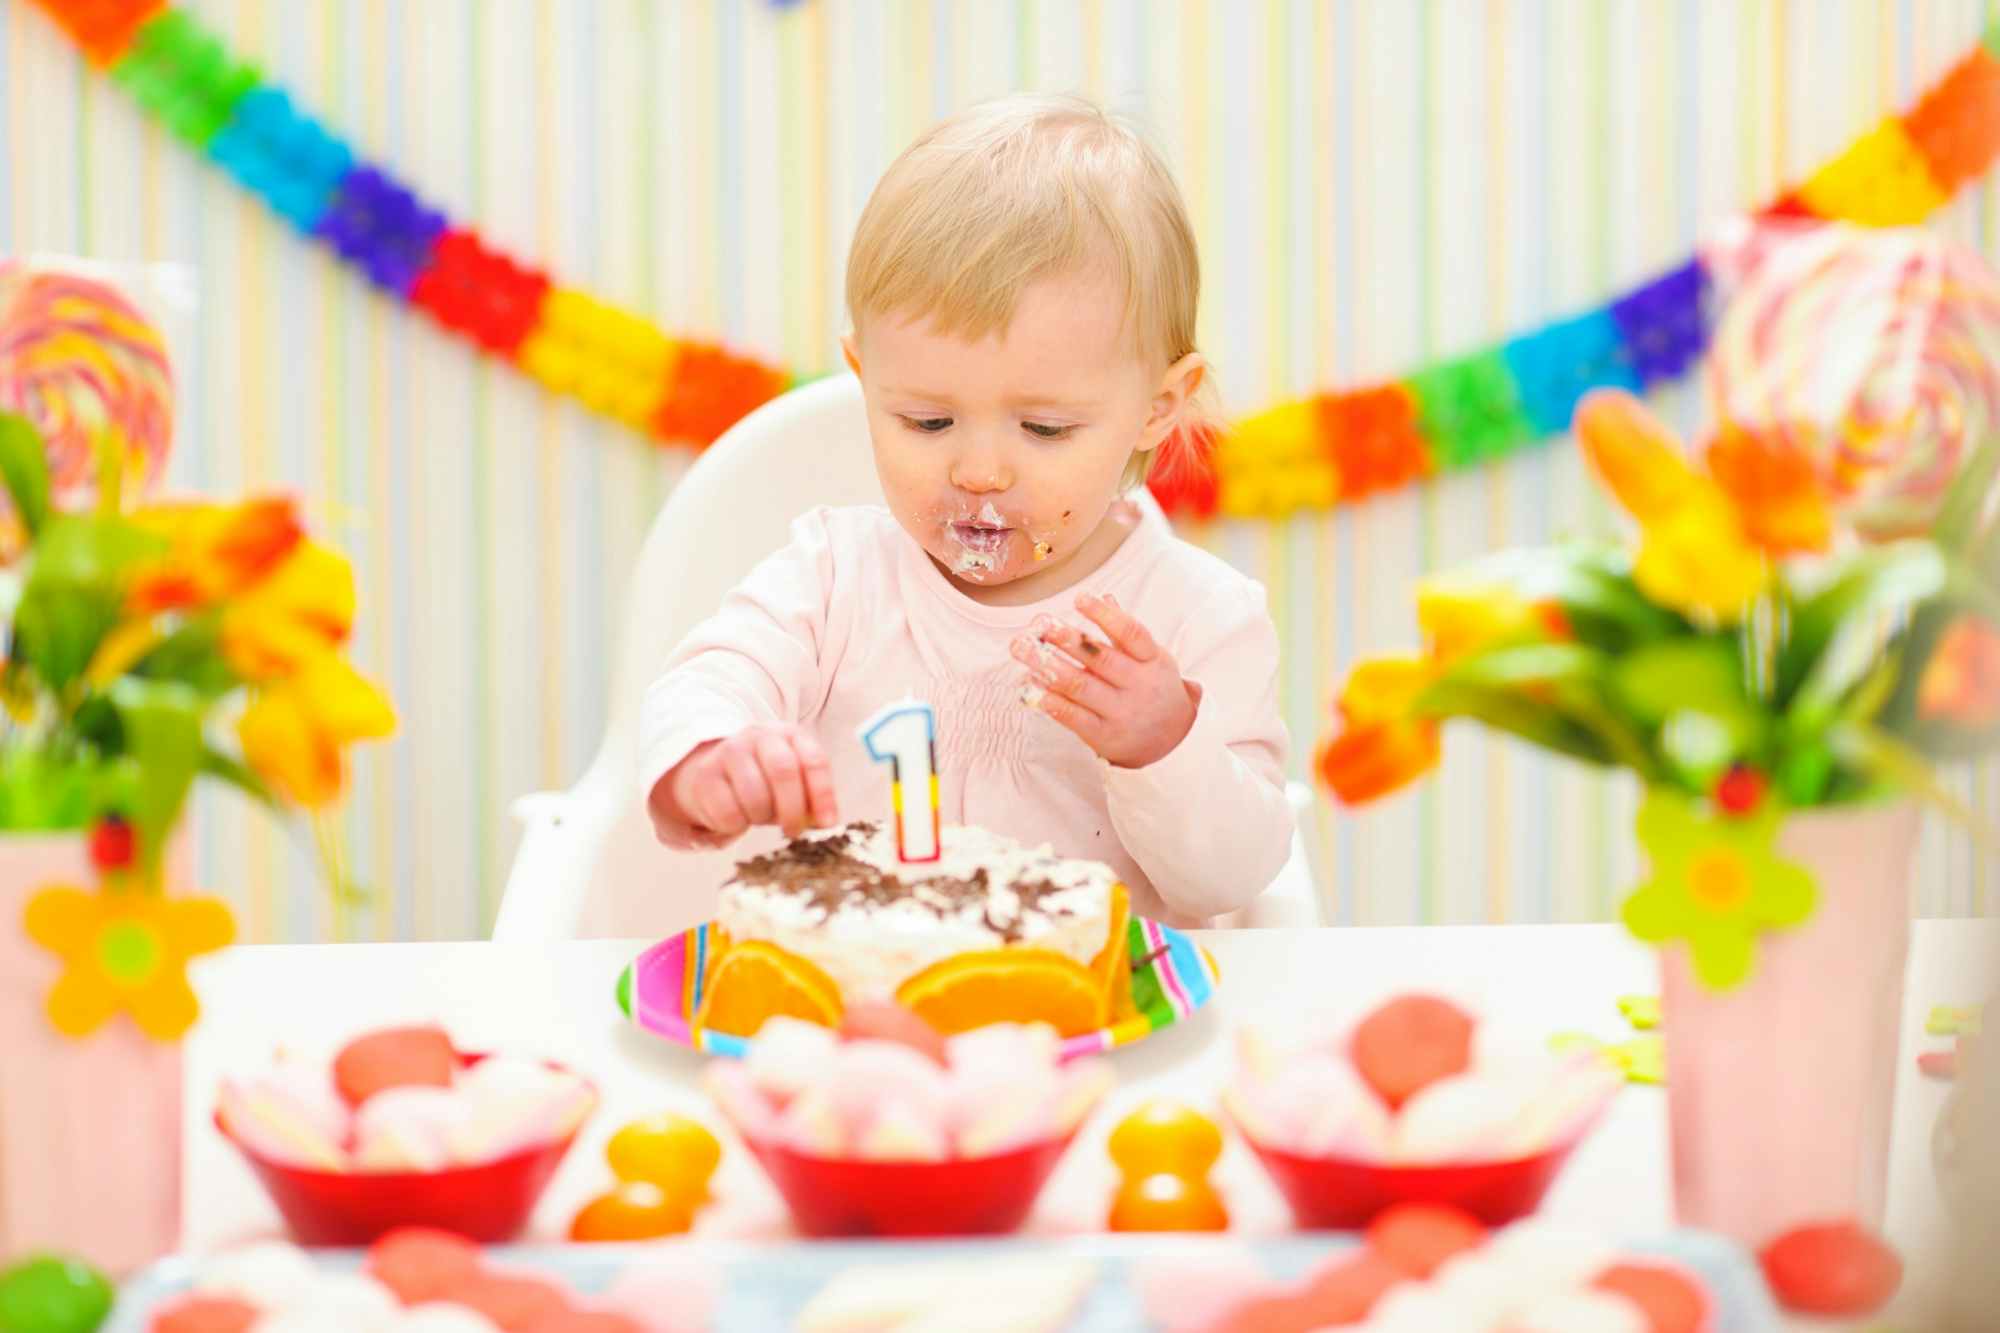 A baby digging into a cake with their hands